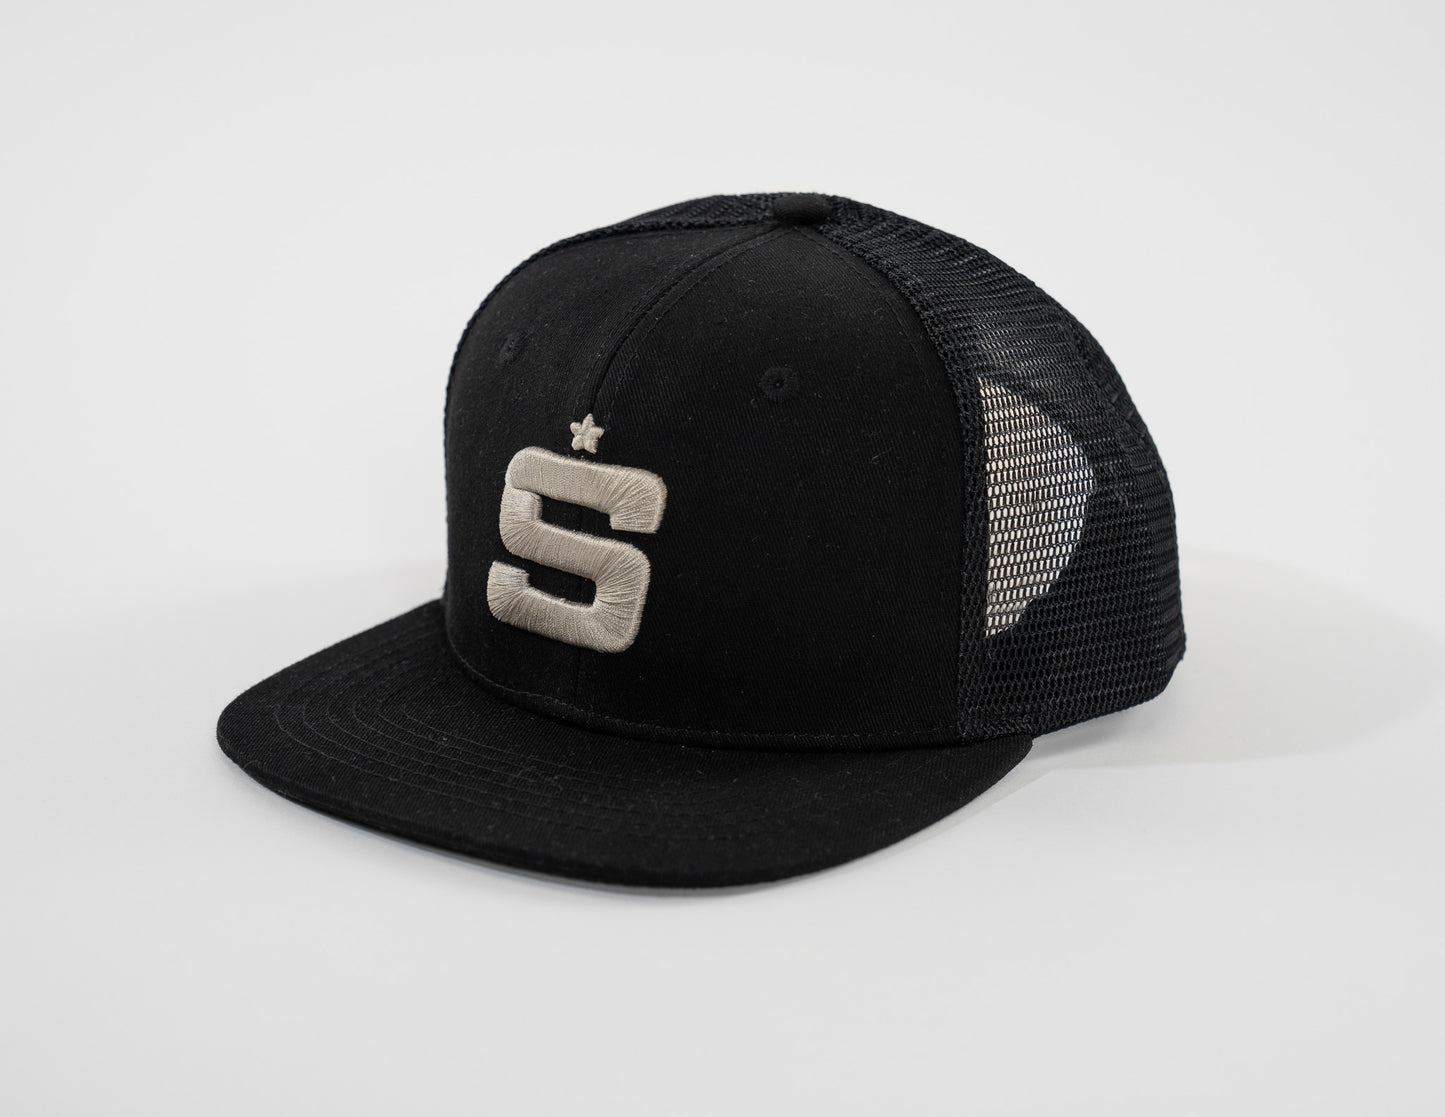 TRUCKER STYLE BLACK CAP WITH WHITE 3D EMBROIDERY